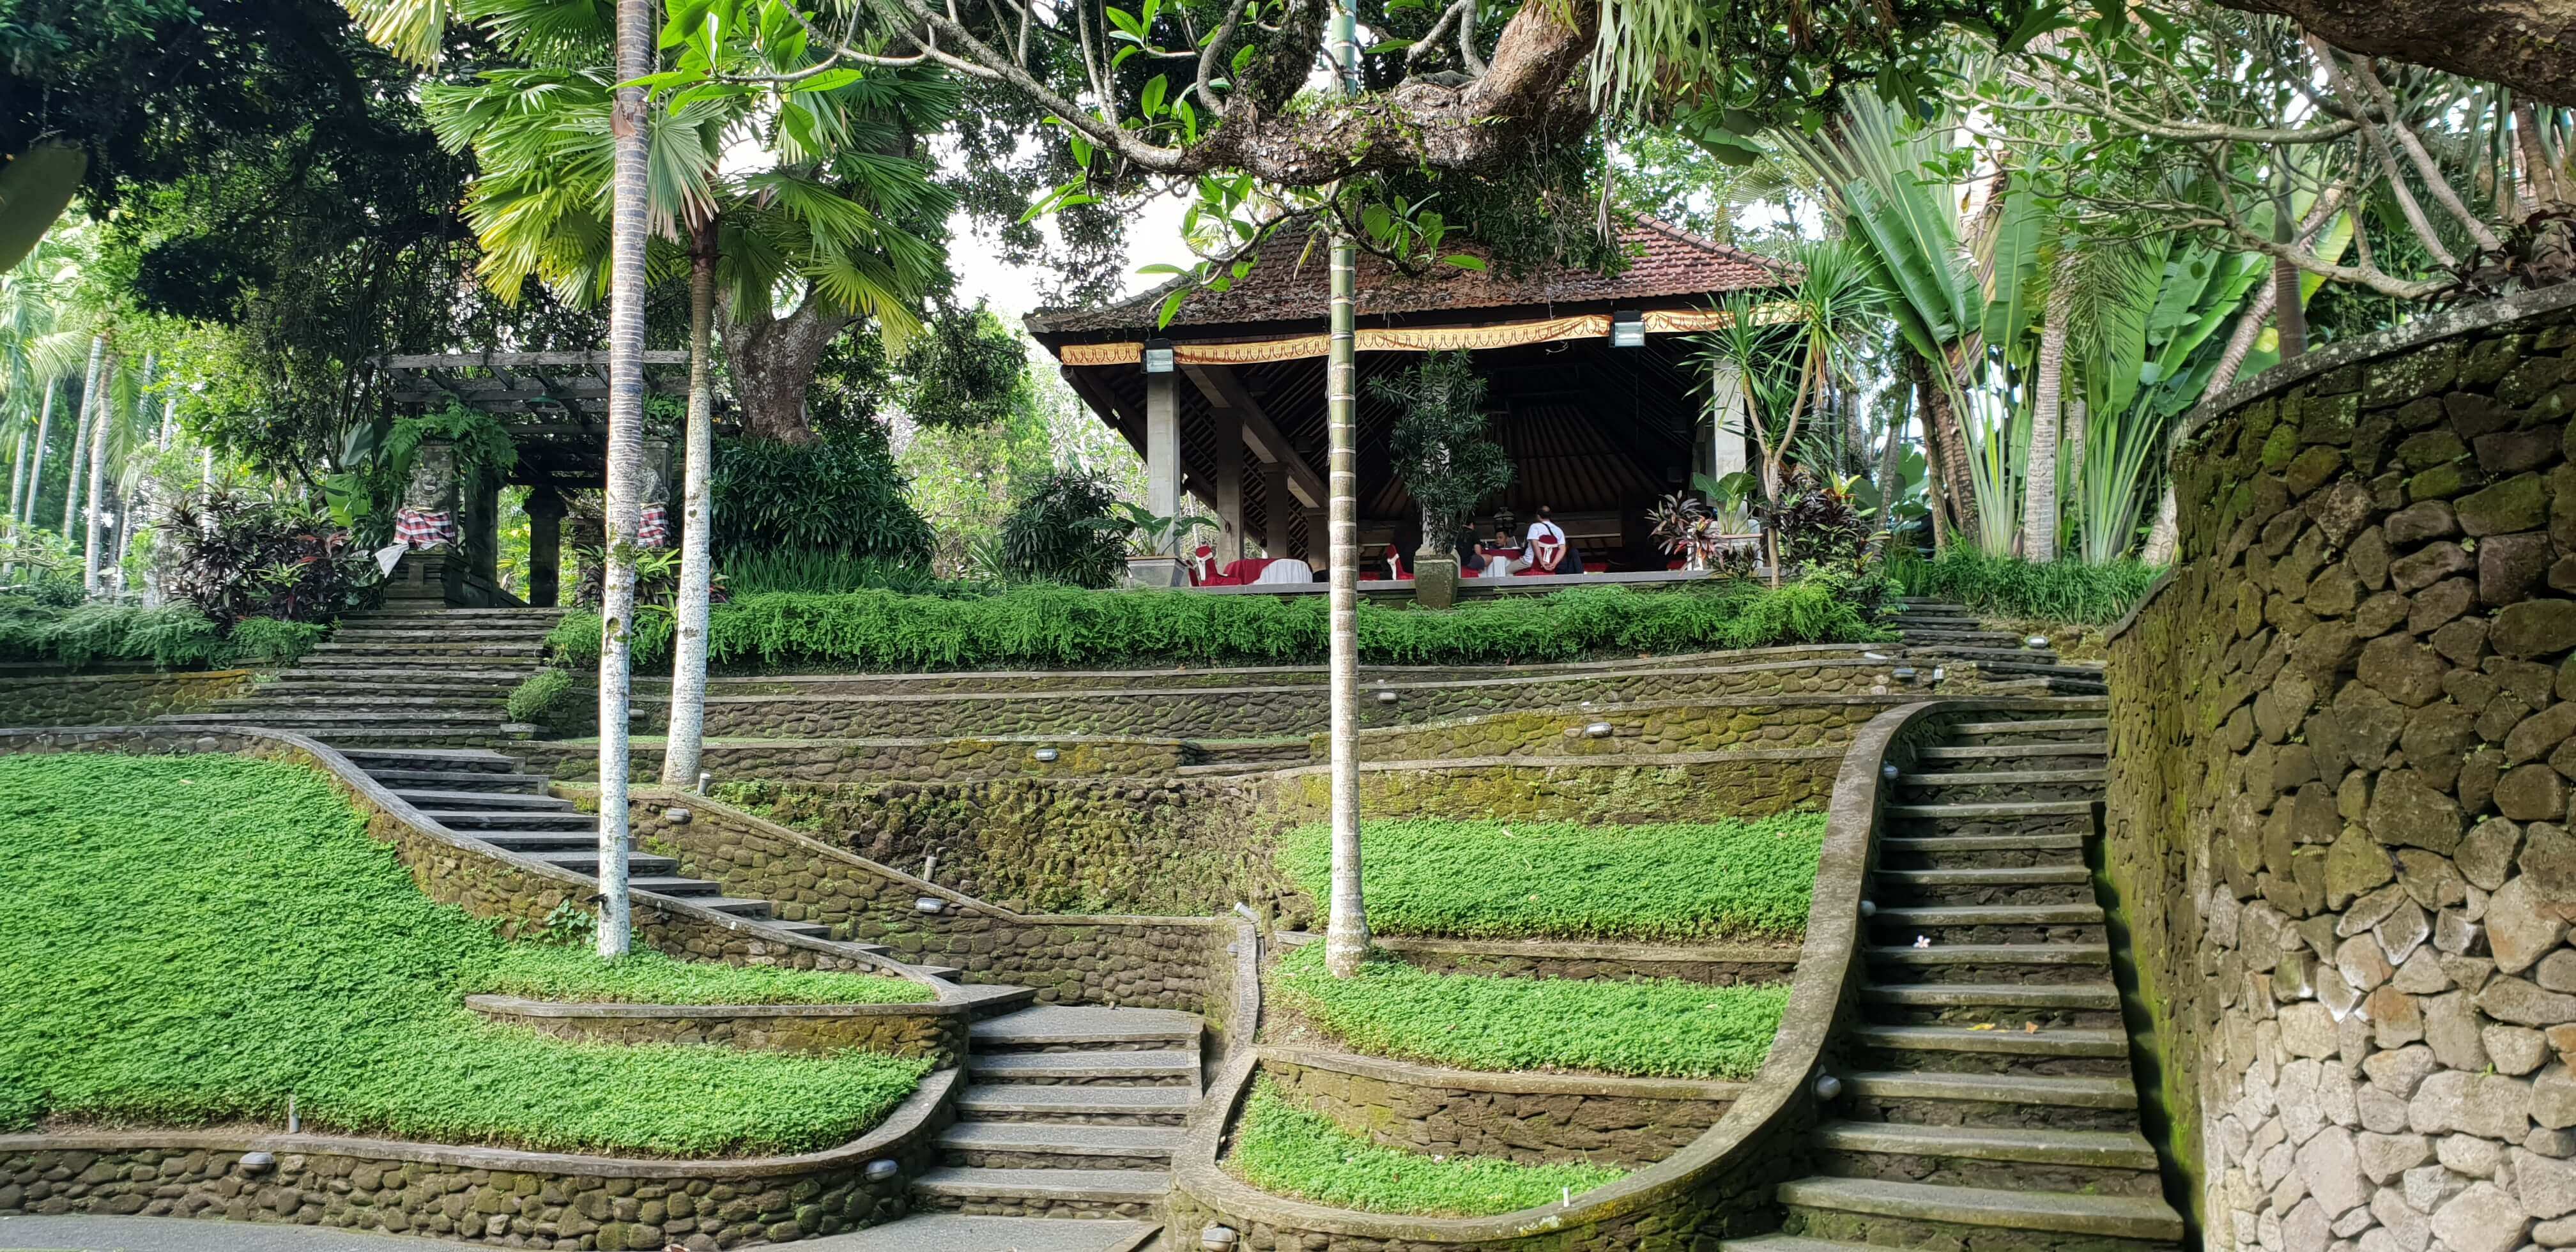 The green gardens on the premises of the museum are a welcome change from the crowded streets of Ubud